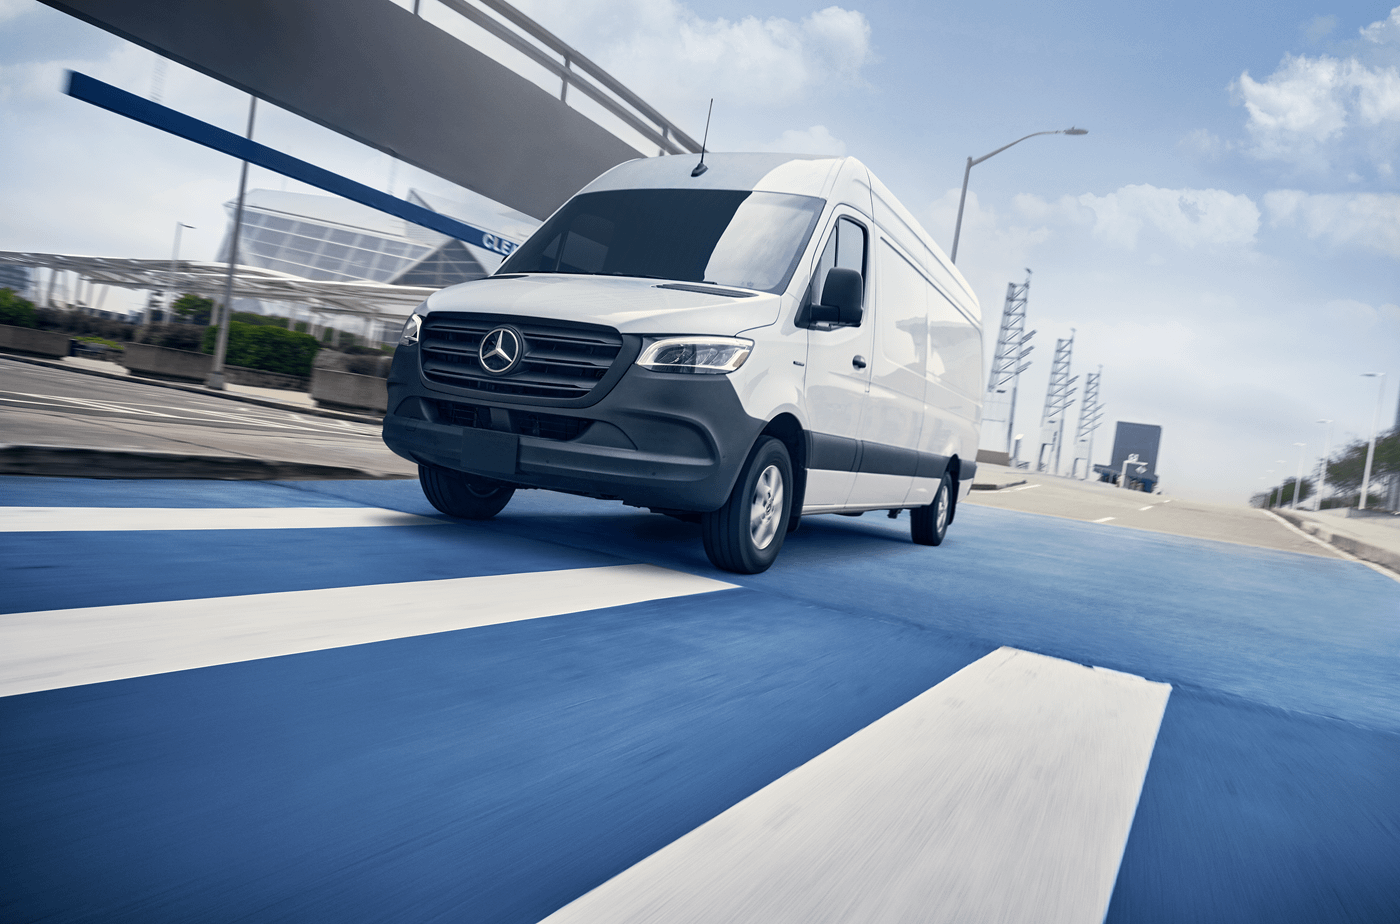 Pricing and Specification Revealed for the New Mercedes-Benz eSprinter!